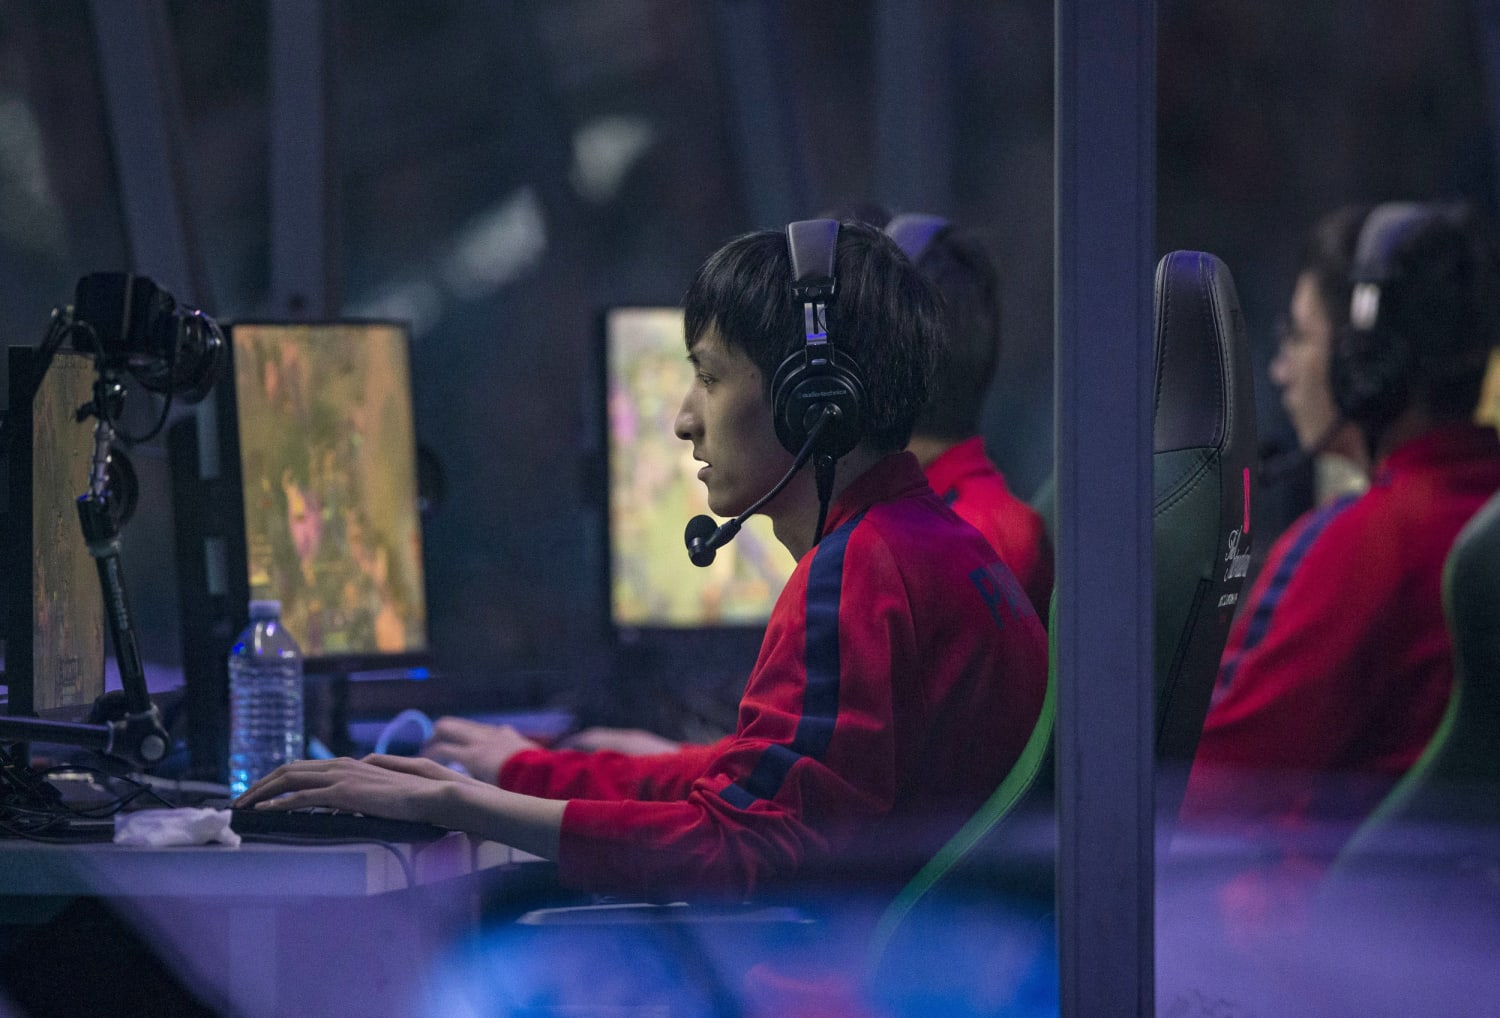 Brazil: Esports and Video Games - Gaming And Media